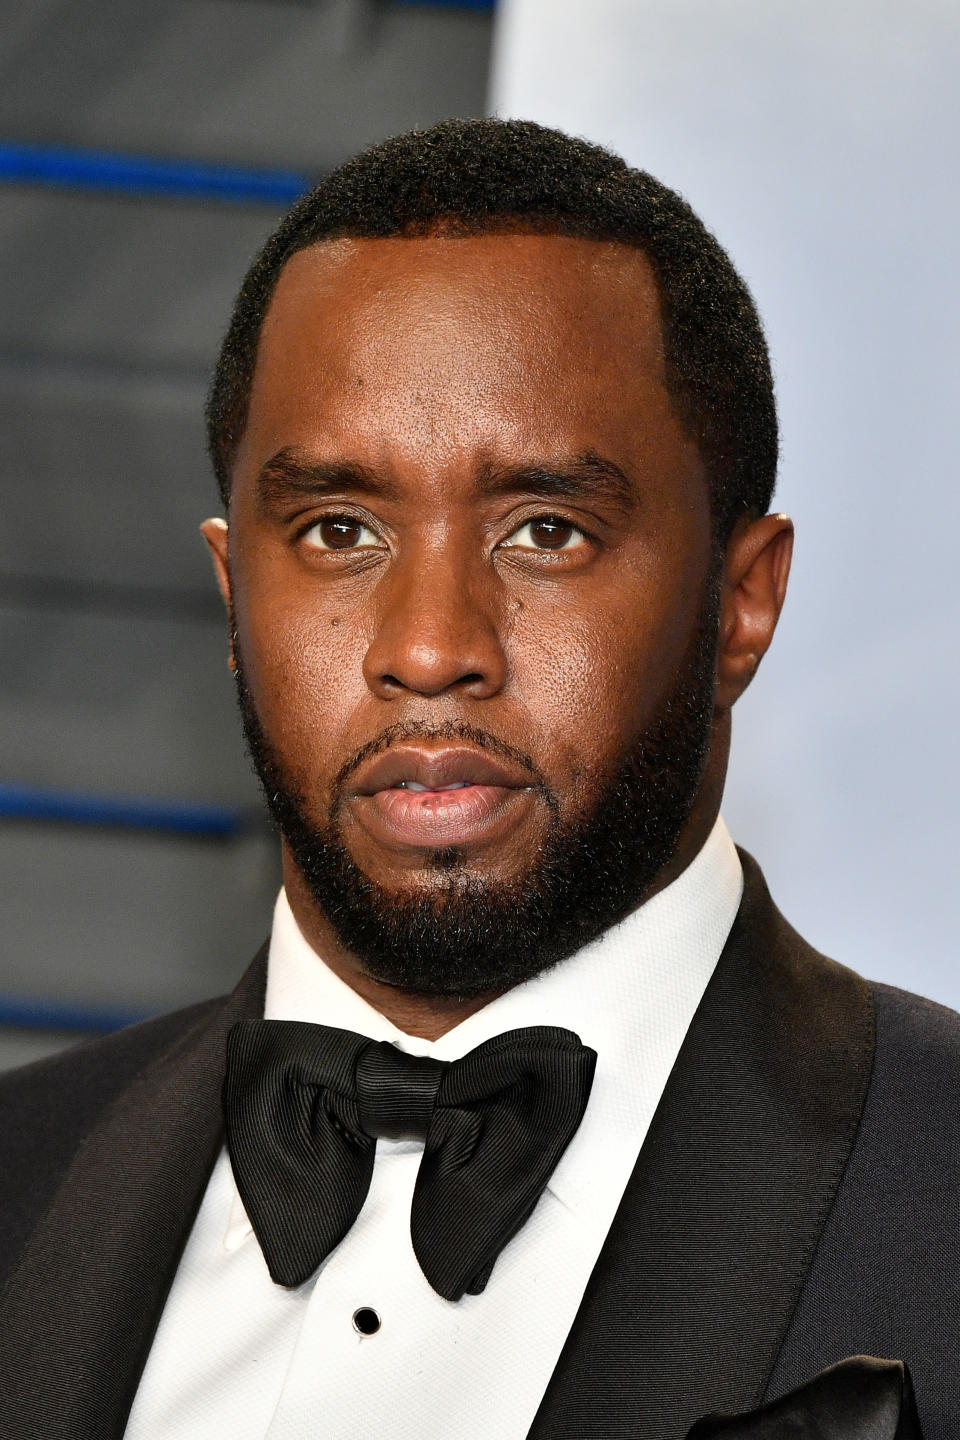 Sean "Diddy" Combs wearing suit